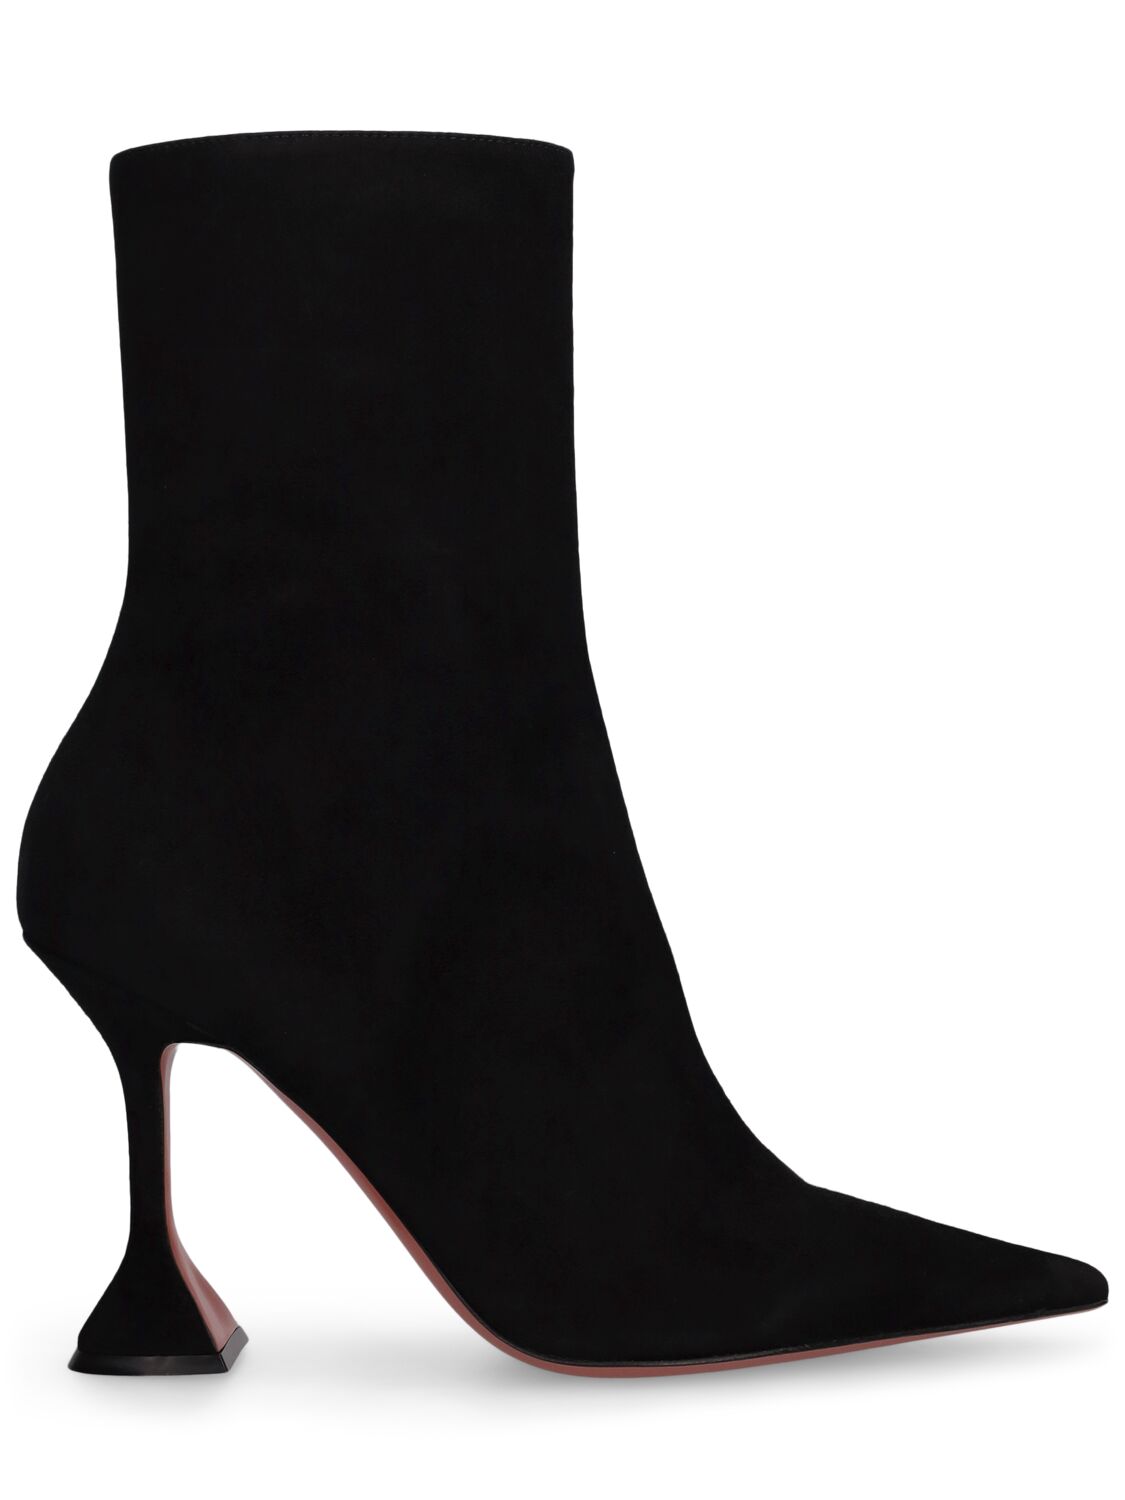 95mm Georgia Suede Ankle Boots